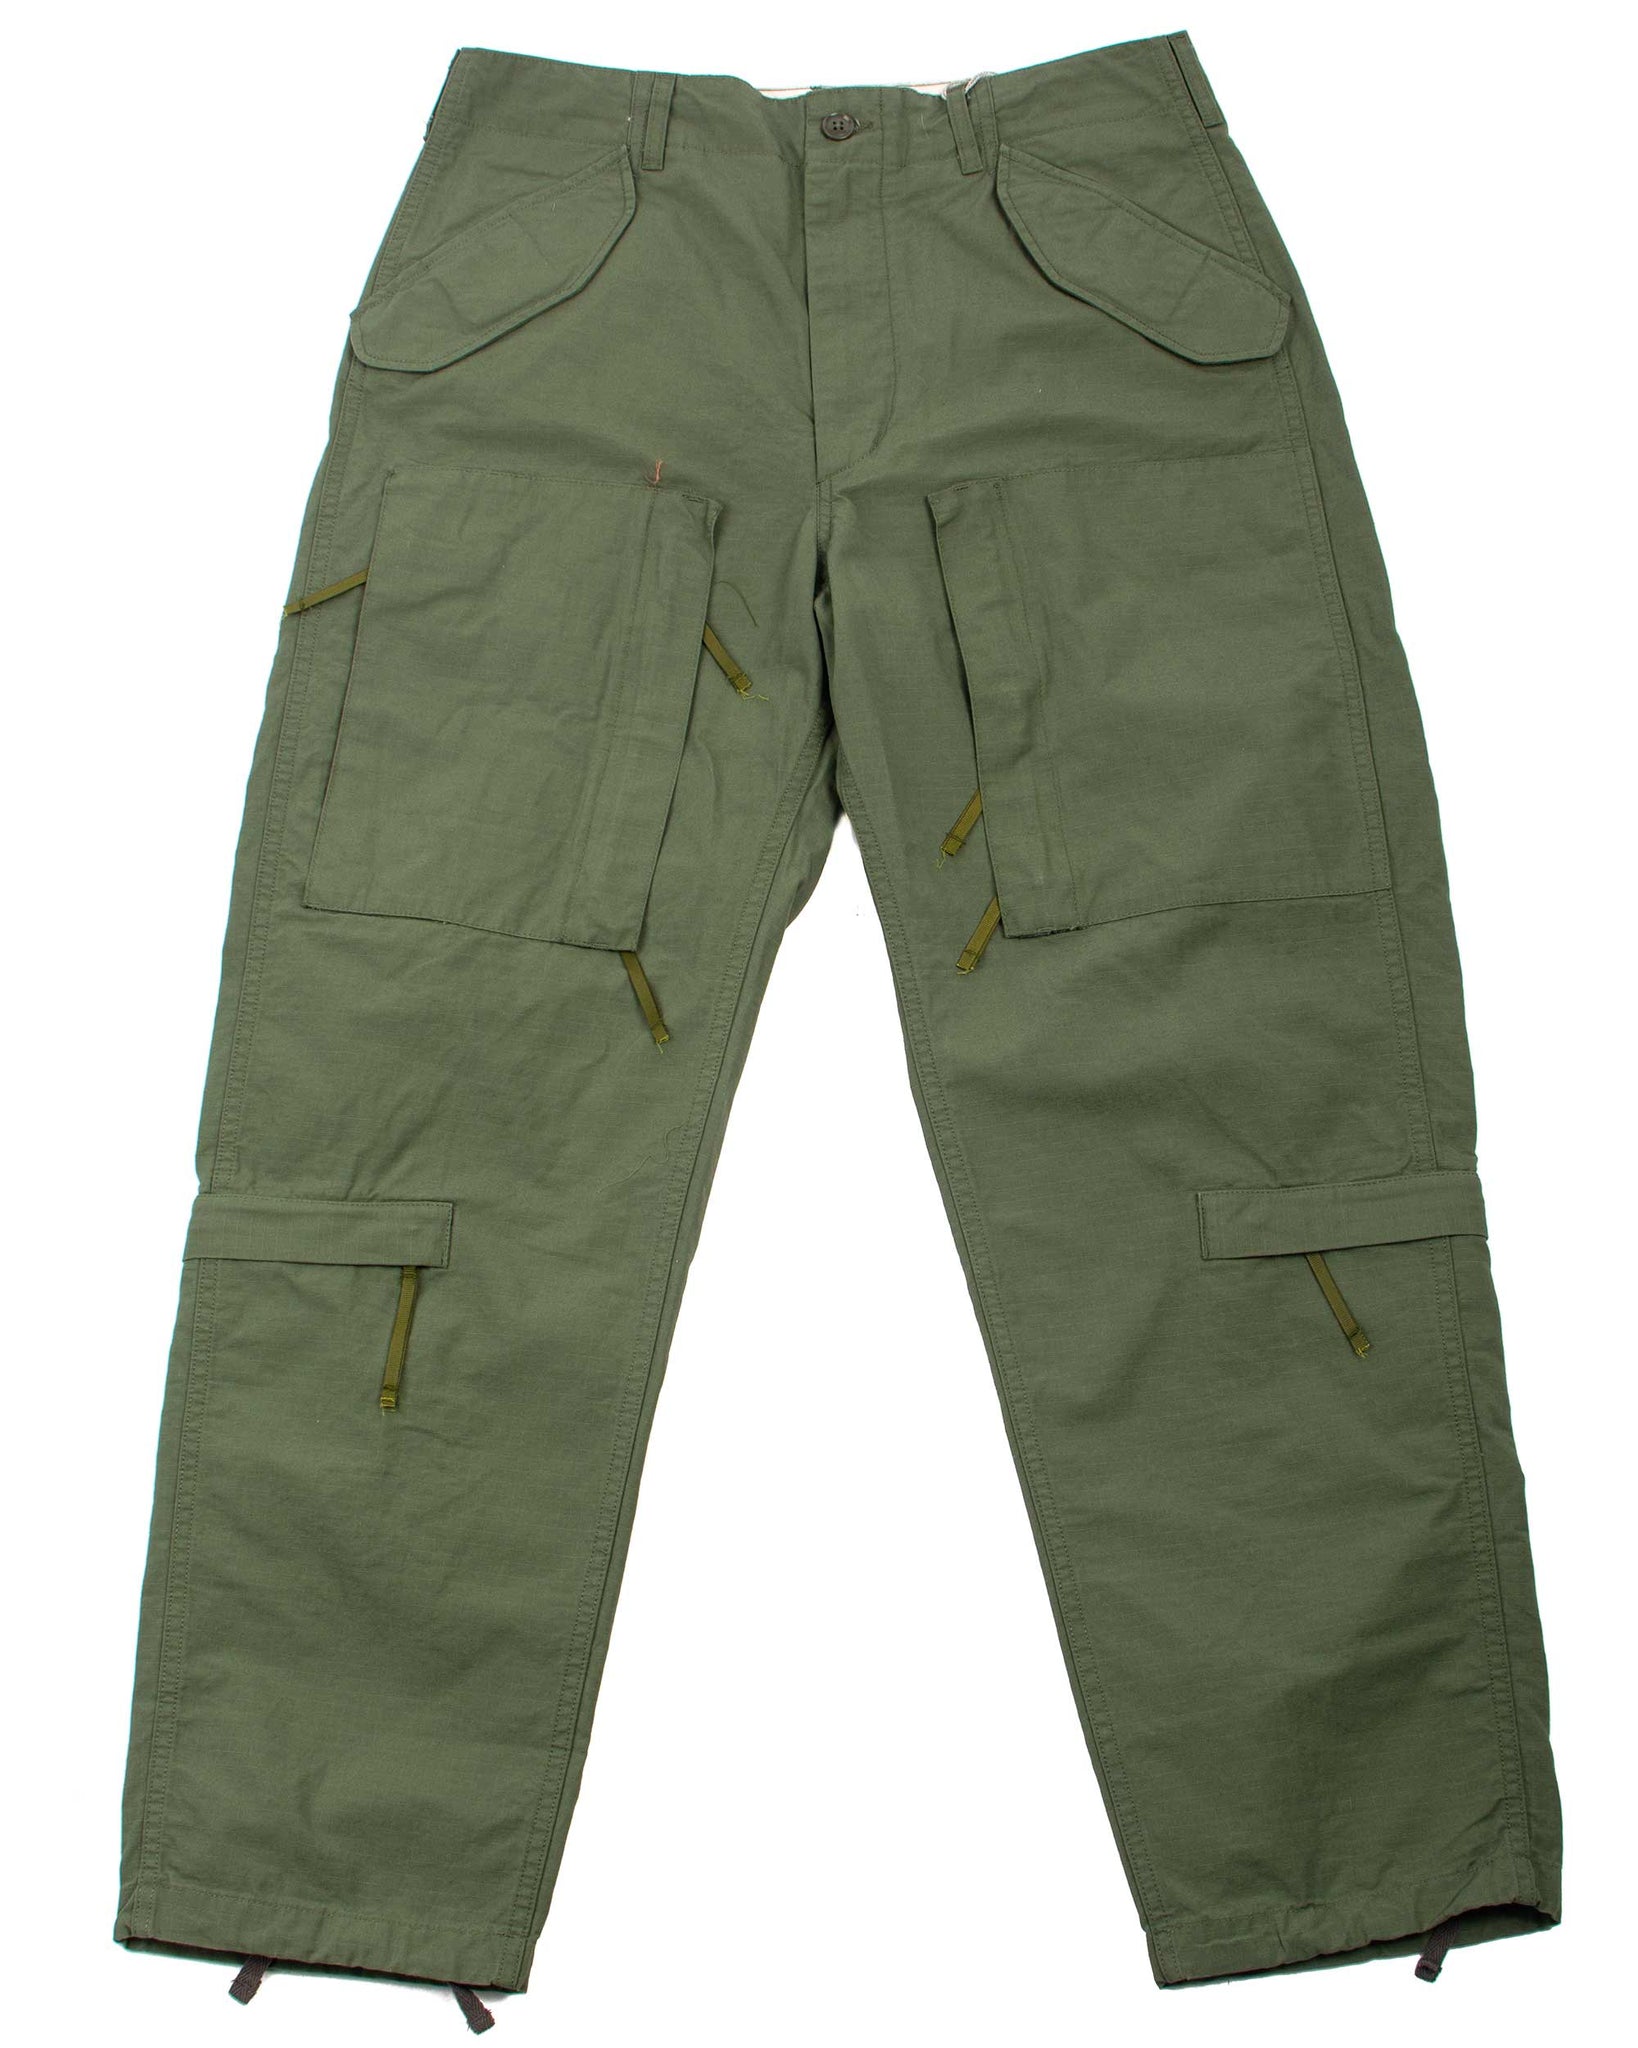 Engineered Garments Aircrew Pant Olive Cotton Ripstop